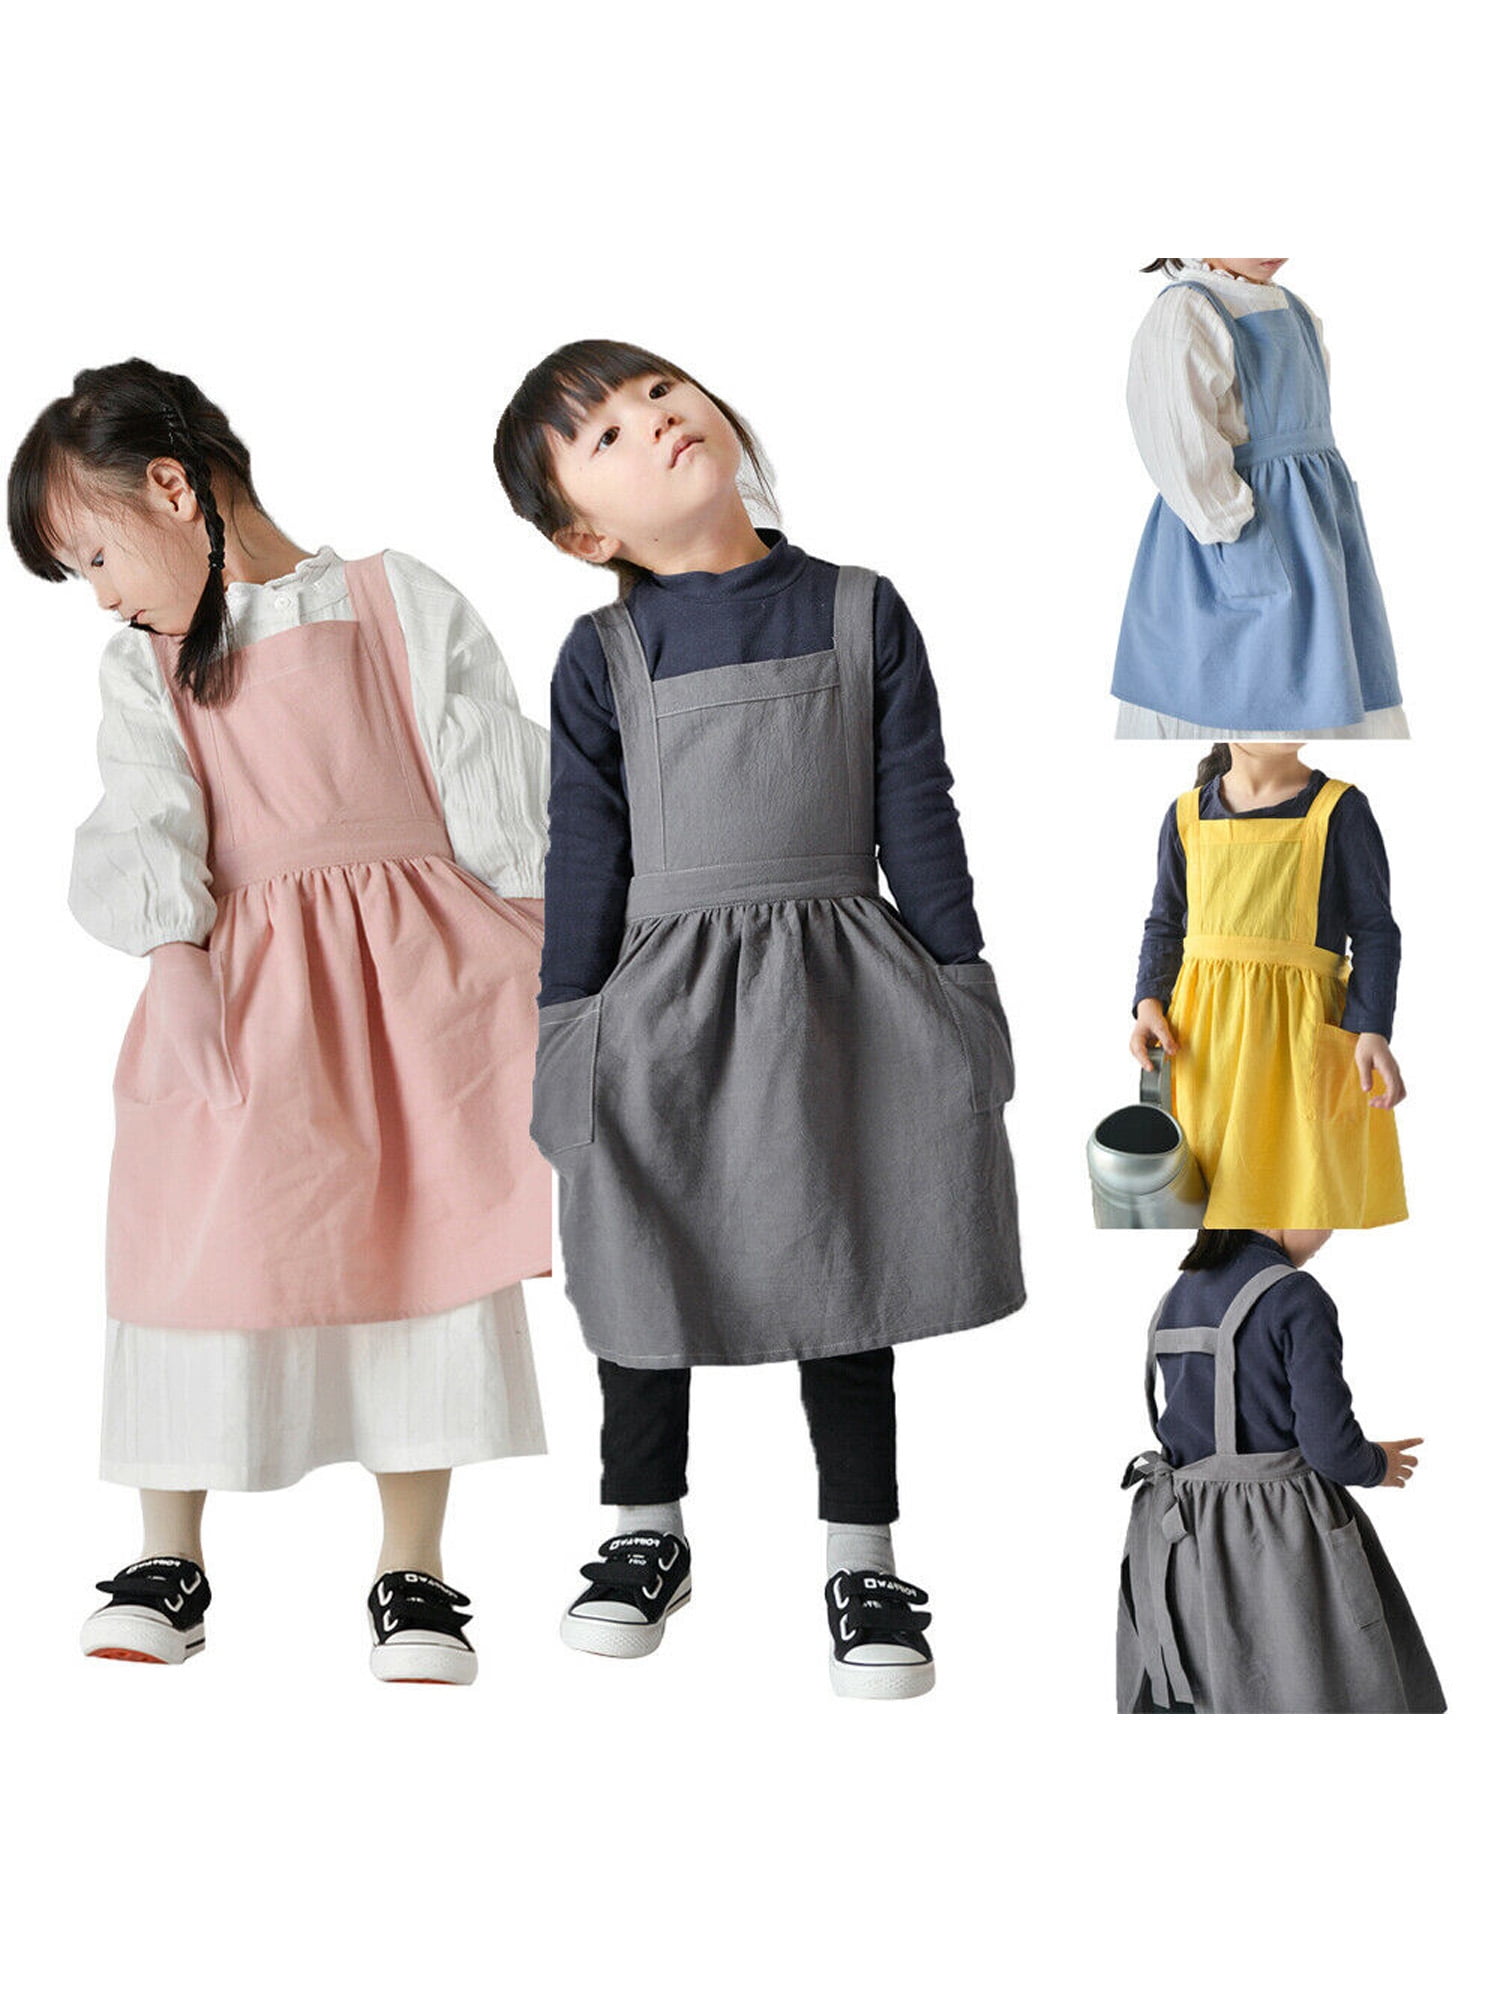 Children Aprons With Pockets Chef Apron Kitchen Cooking Aprons Waitress  Server Pinafore Polyester Plain Color Garden Apron For Girl Boys Kid From  Happinessker, $2.12